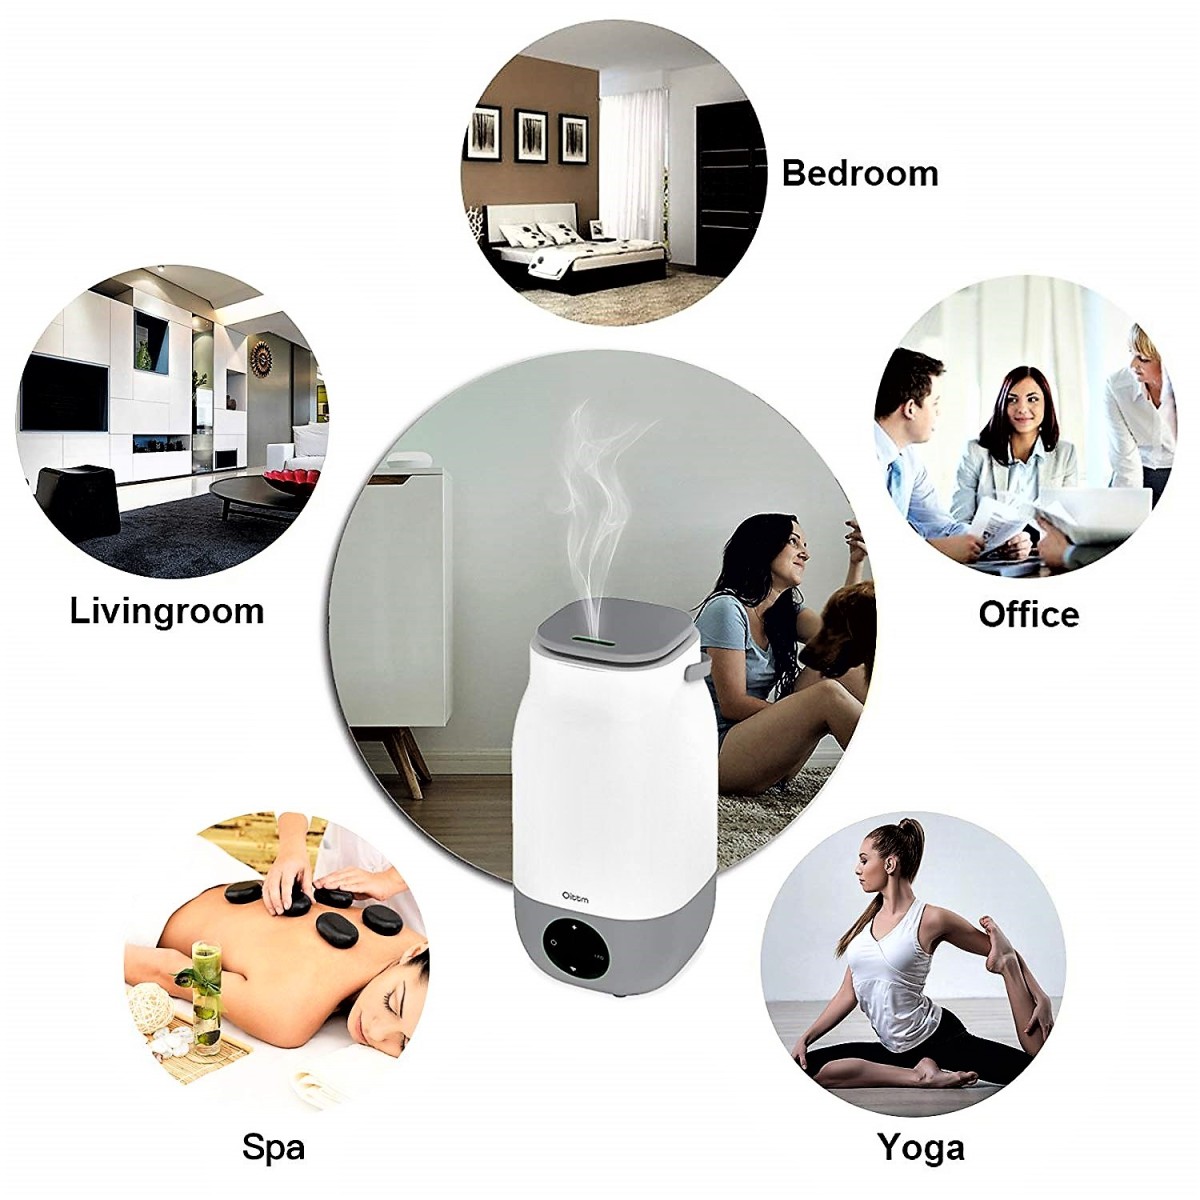 Review of Oittm Smart Humidifier (Works With Amazon Alexa & Google Home)